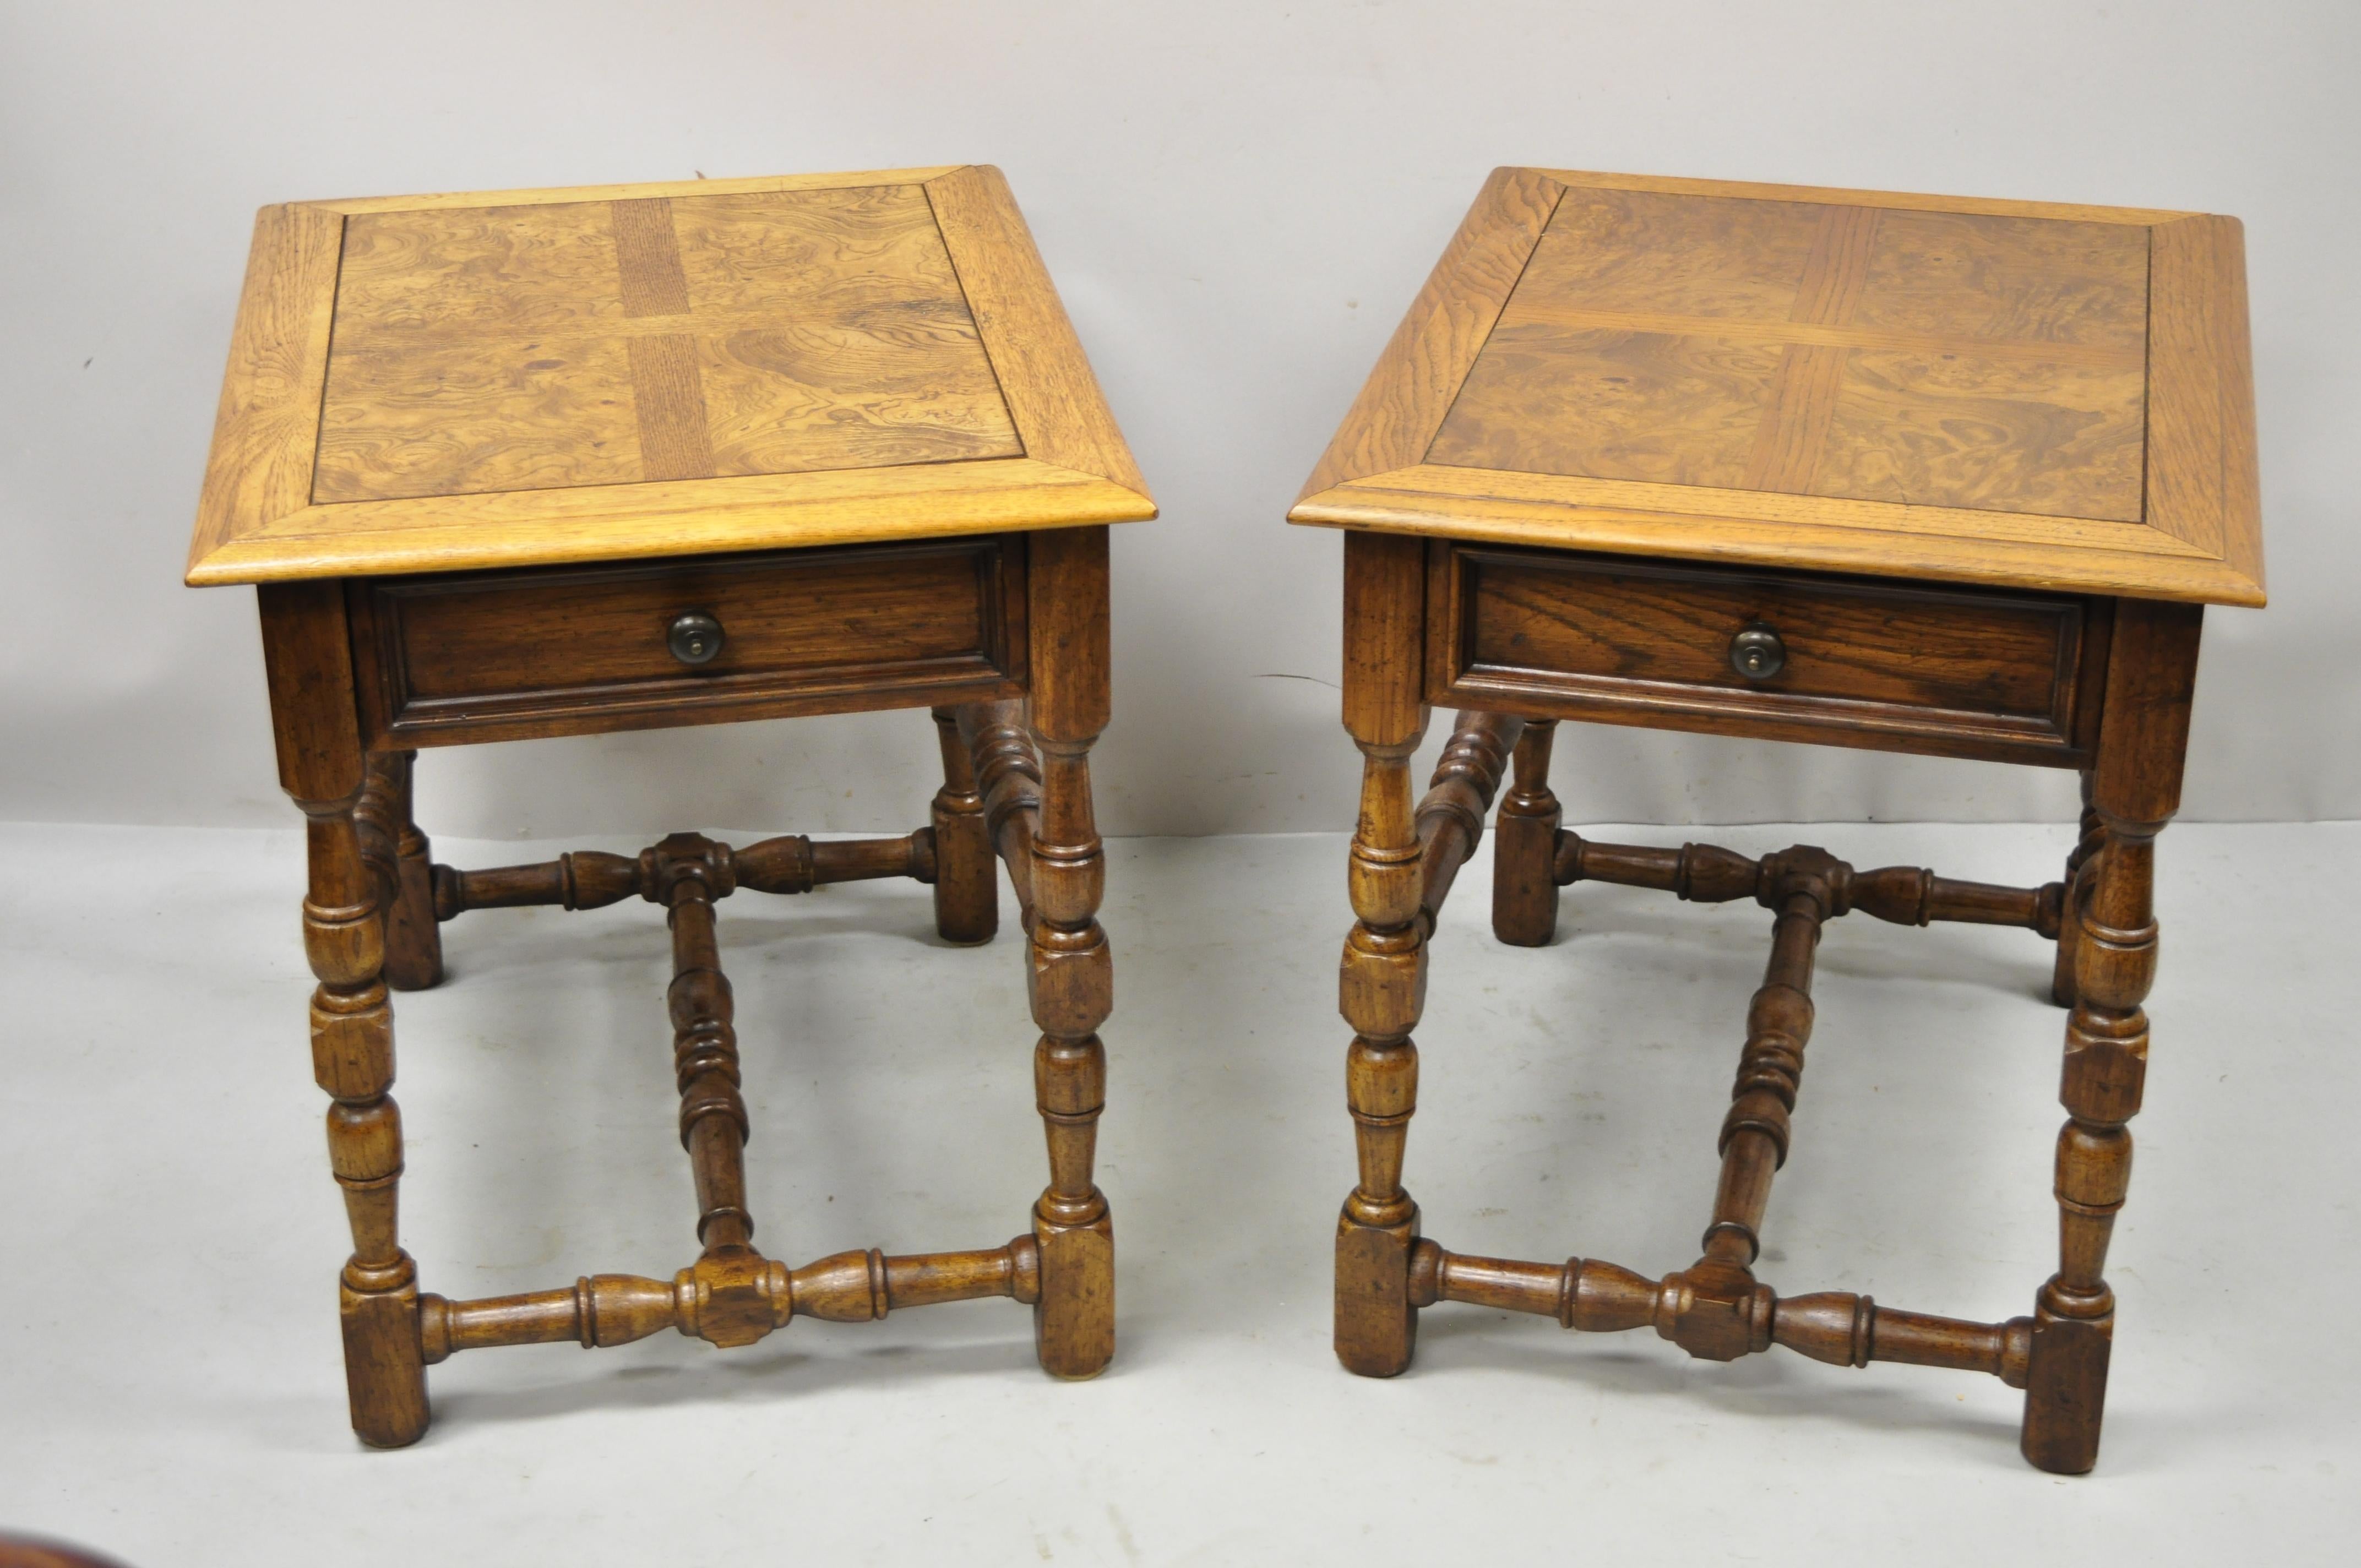 Hekman French Country English Jacobean oak burlwood lamp end tables - a pair. Item features turn carved legs and stretchers, beautiful wood grain, original stamp, 1 dovetailed drawer, very nice vintage item, quality American craftsmanship, great